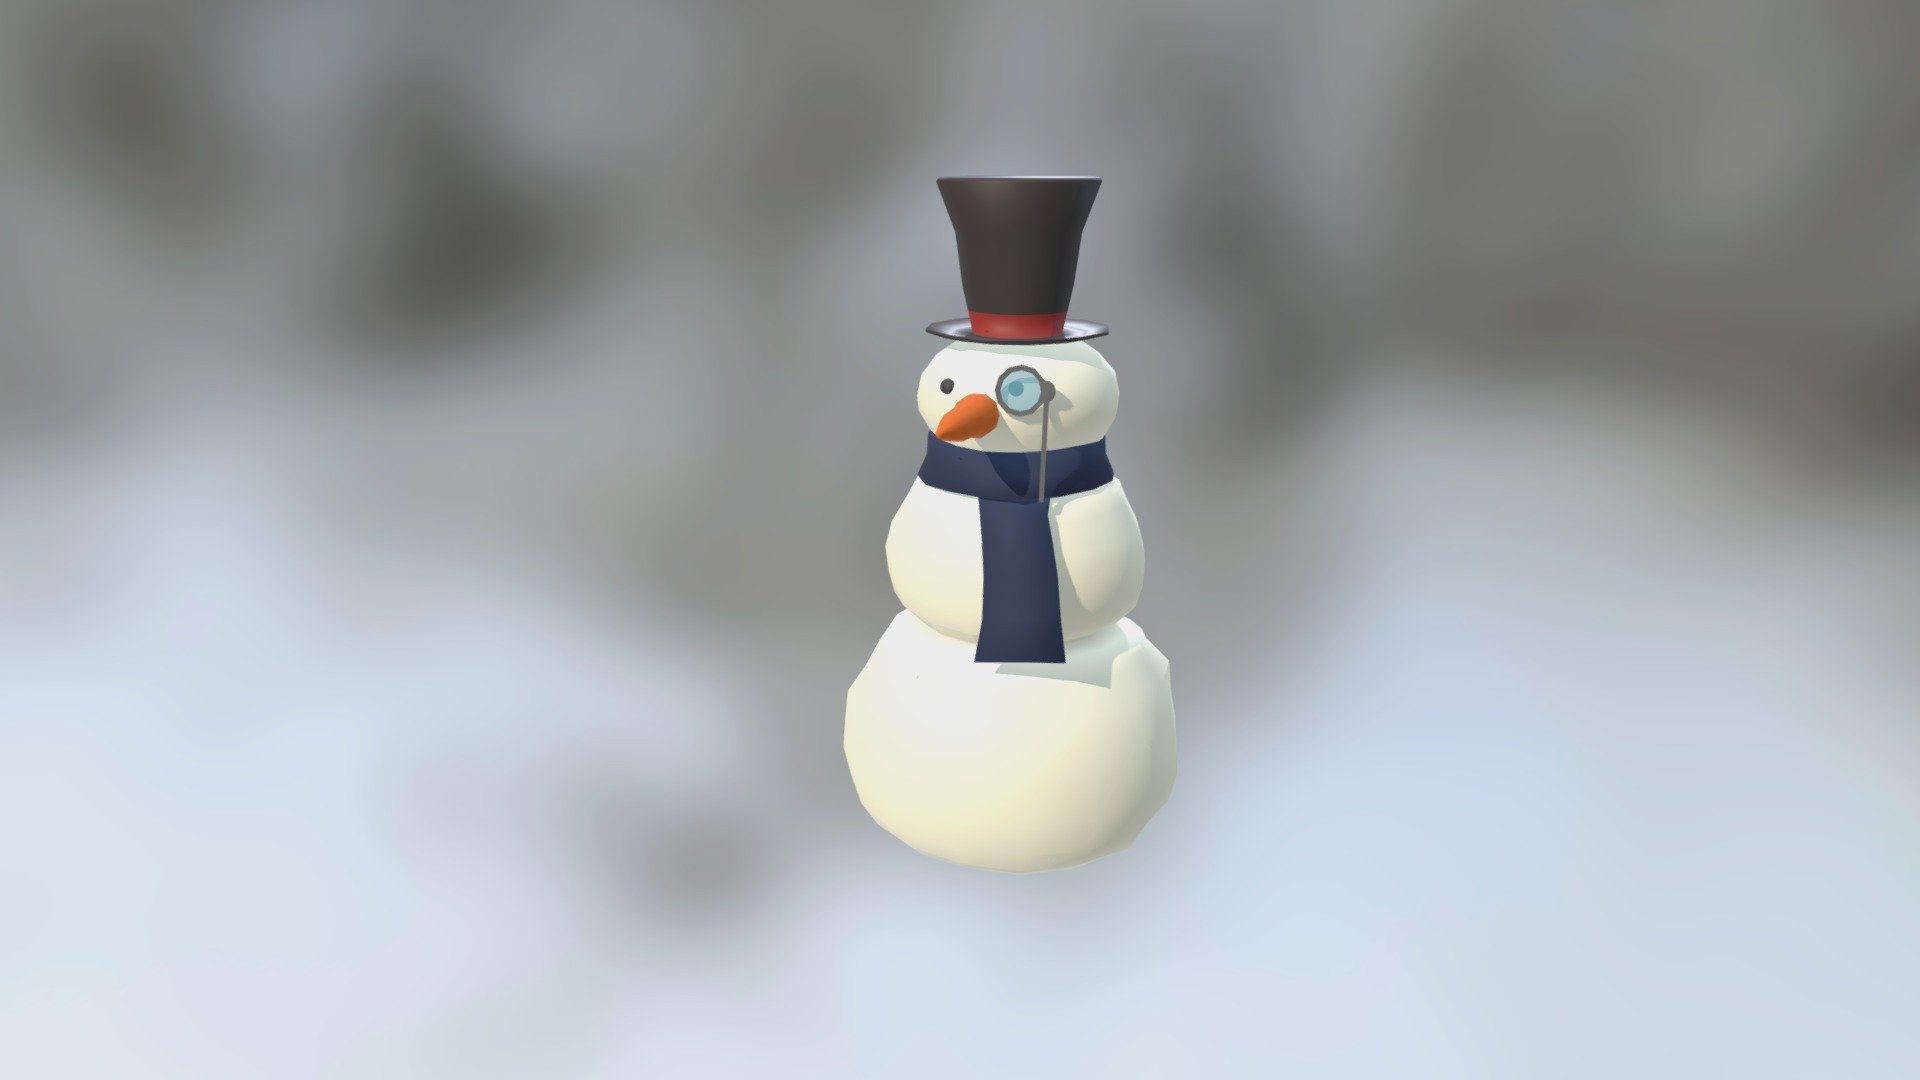 A snowman with a hat, a scarf and a monocle - Snowman - 3D model by Laure (@lolopoly) 3d model